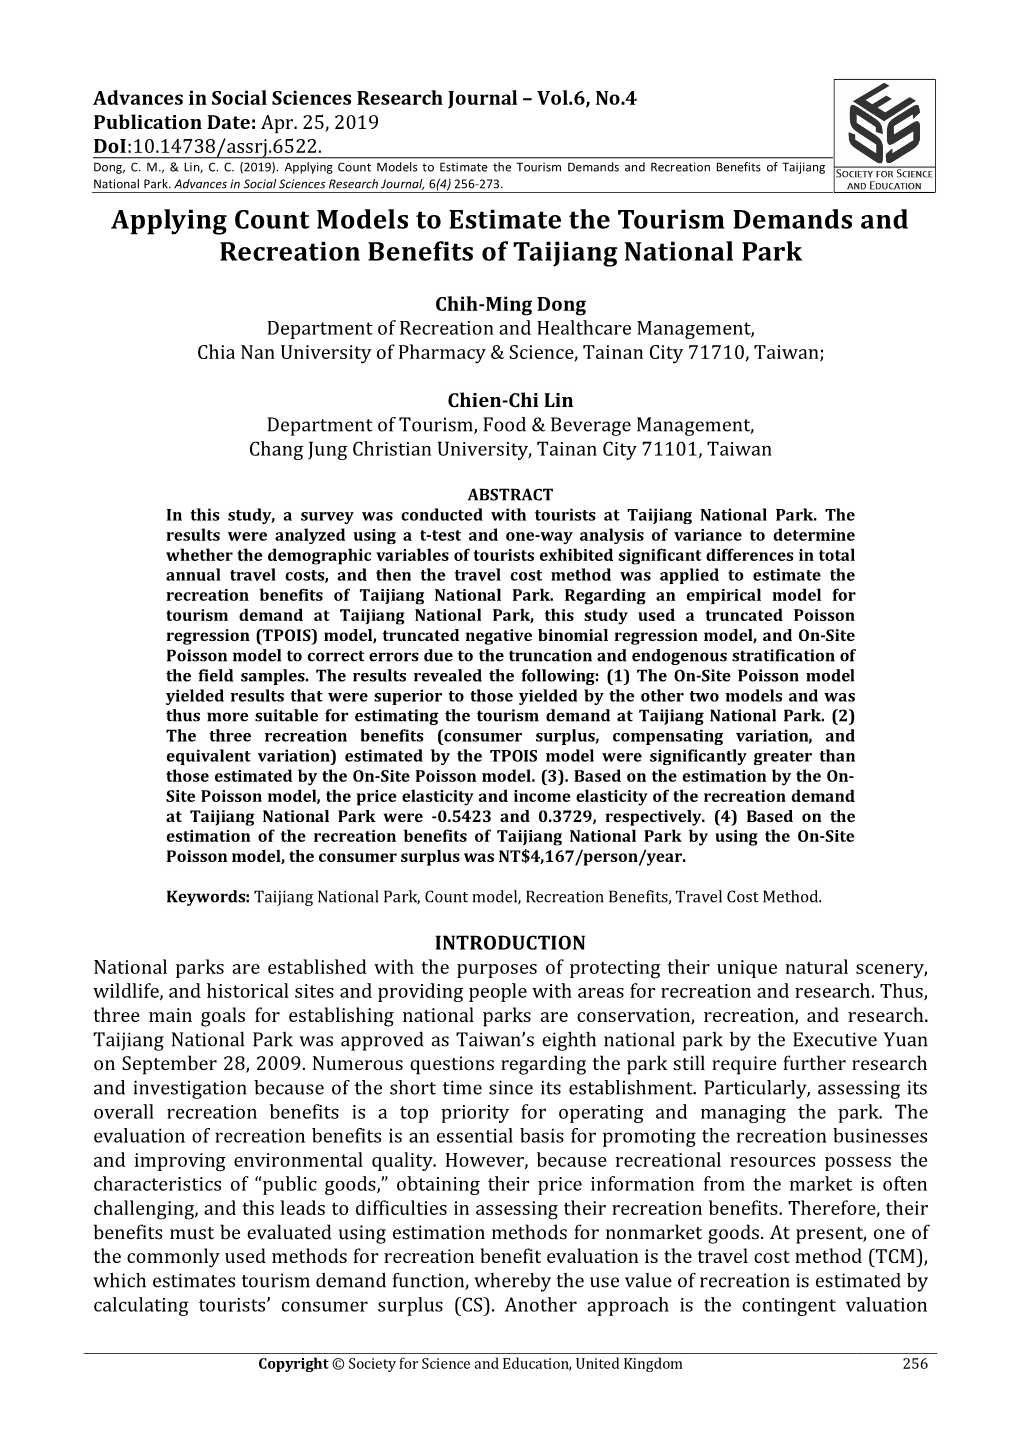 Applying Count Models to Estimate the Tourism Demands and Recreation Benefits of Taijiang National Park